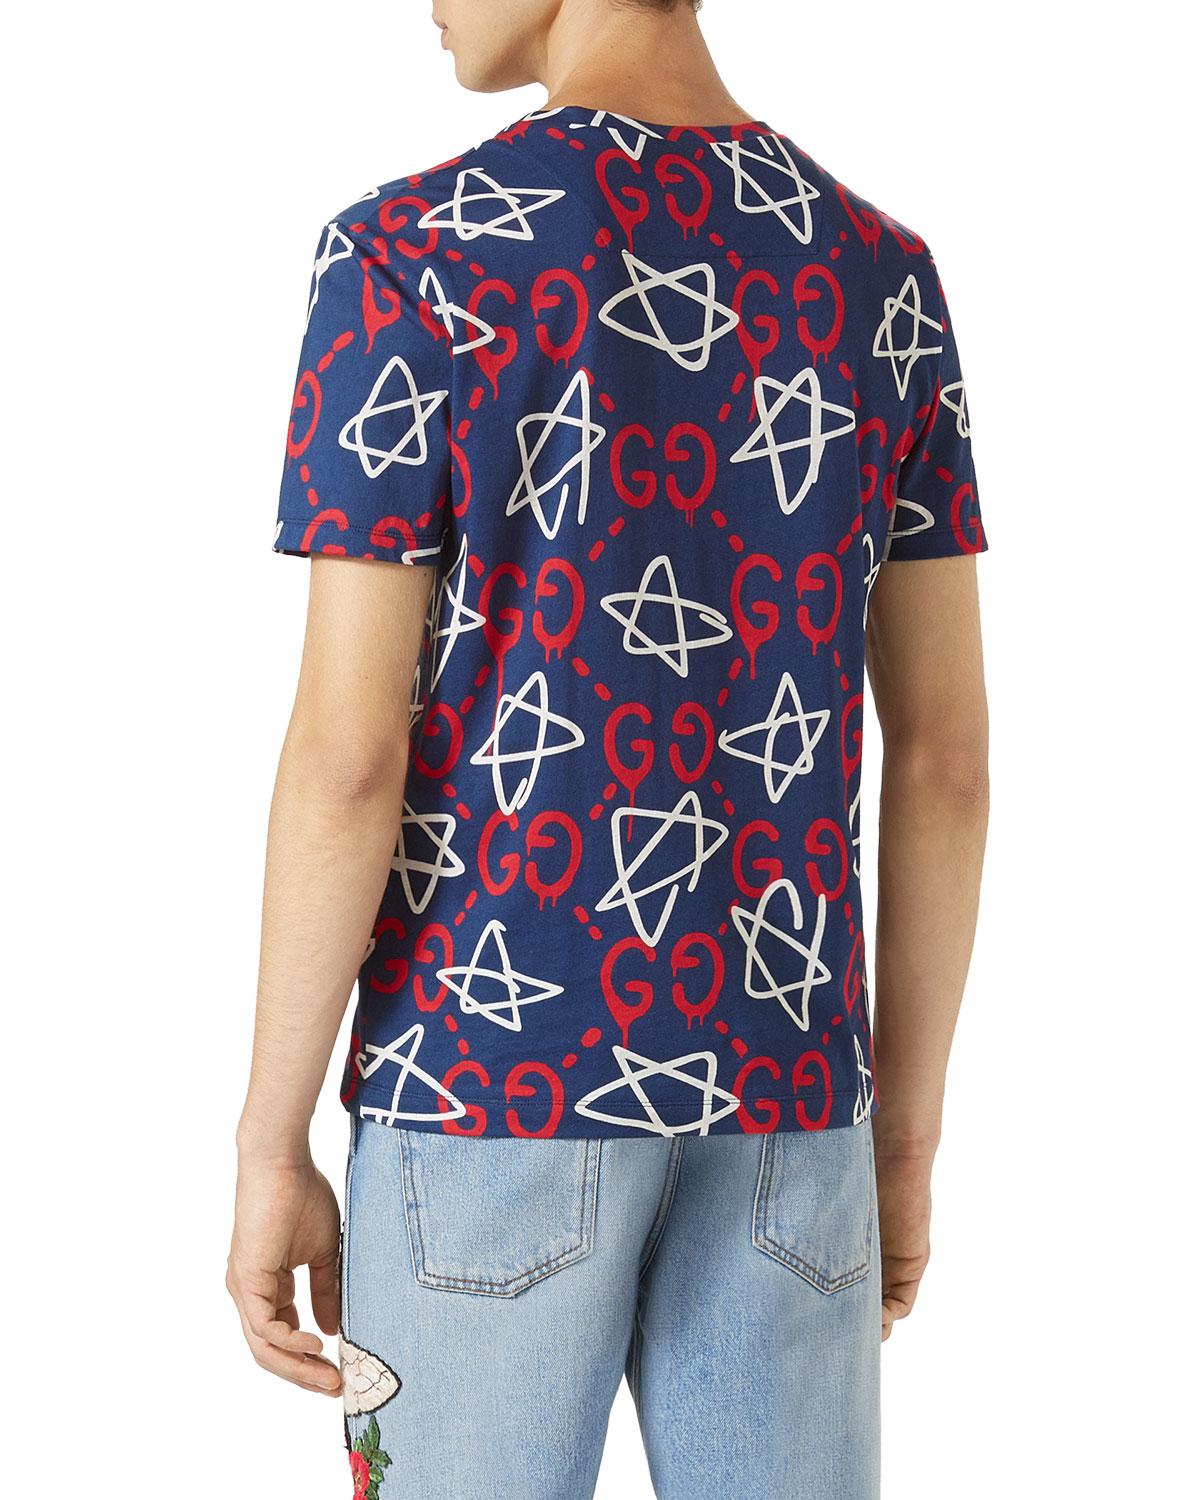 gucci shirt with stars